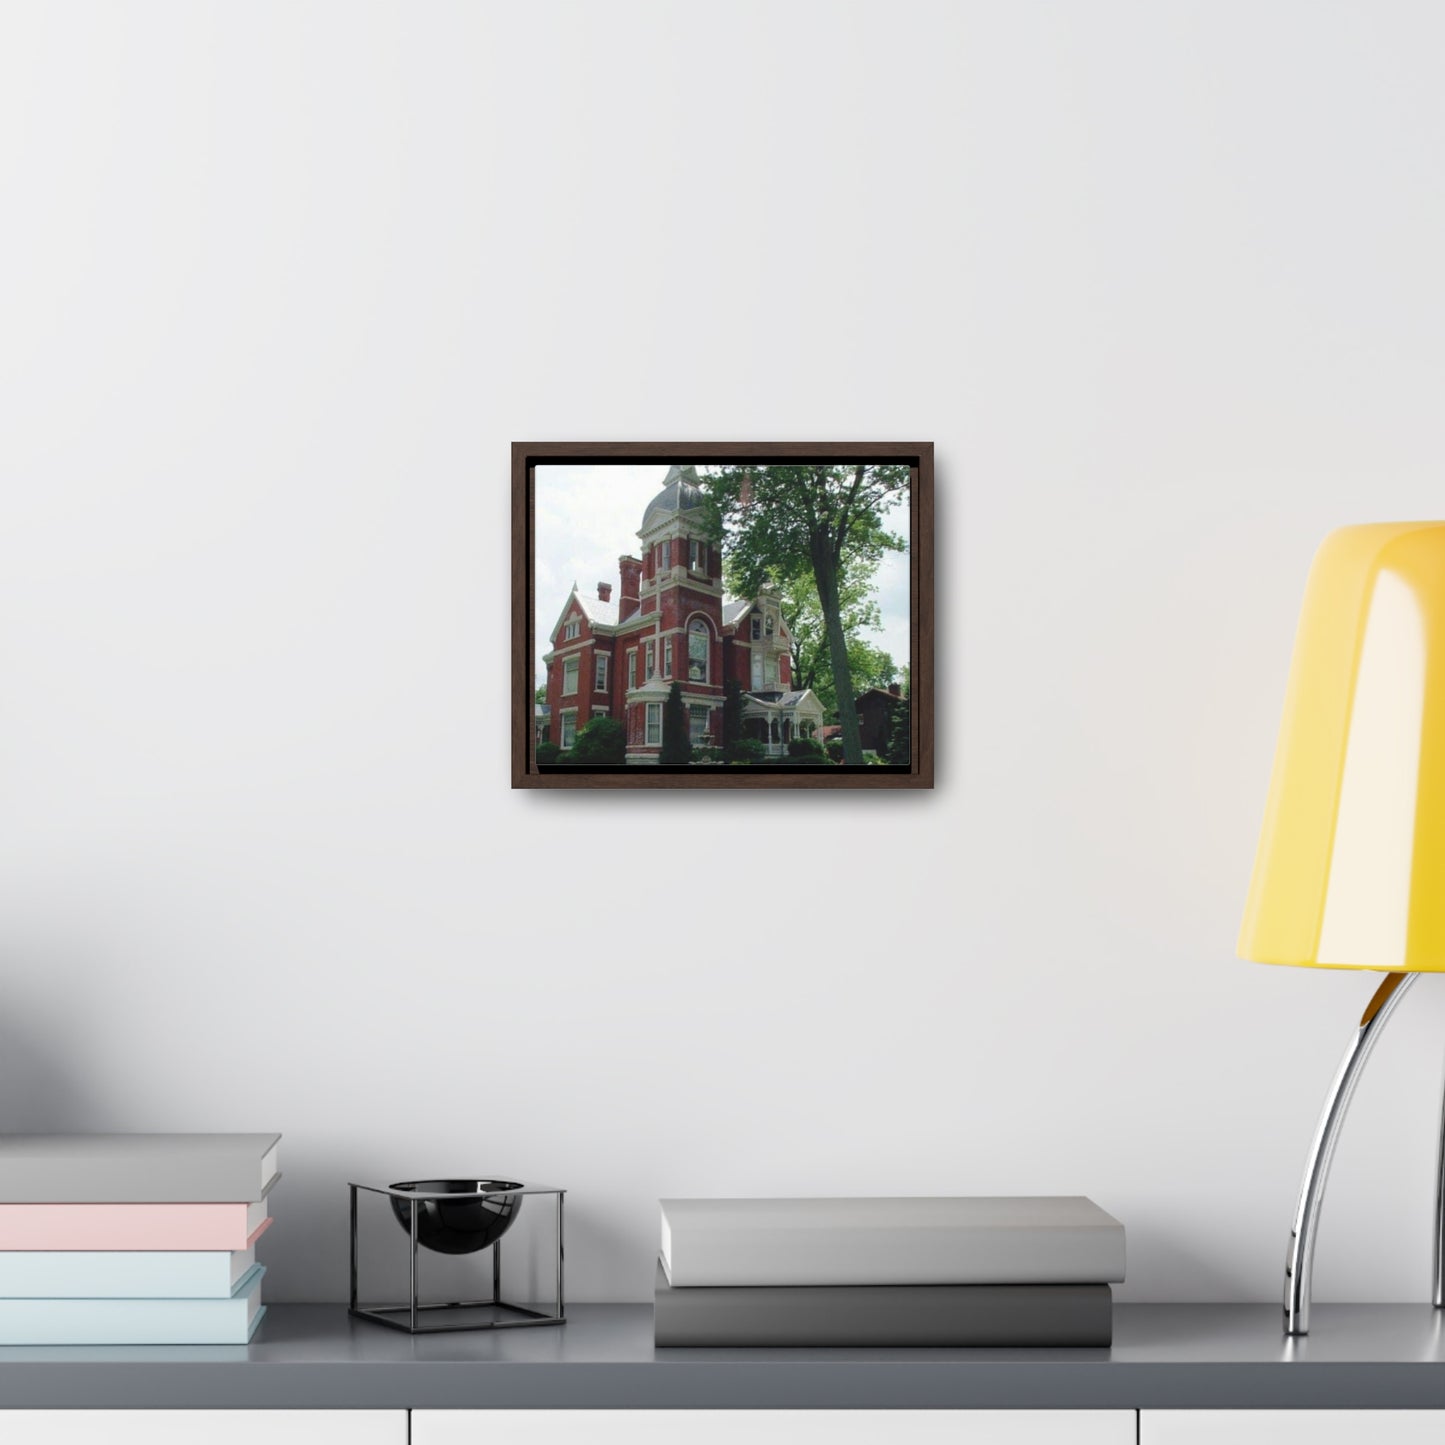 High Tower Gallery Canvas Wraps, Horizontal Frame